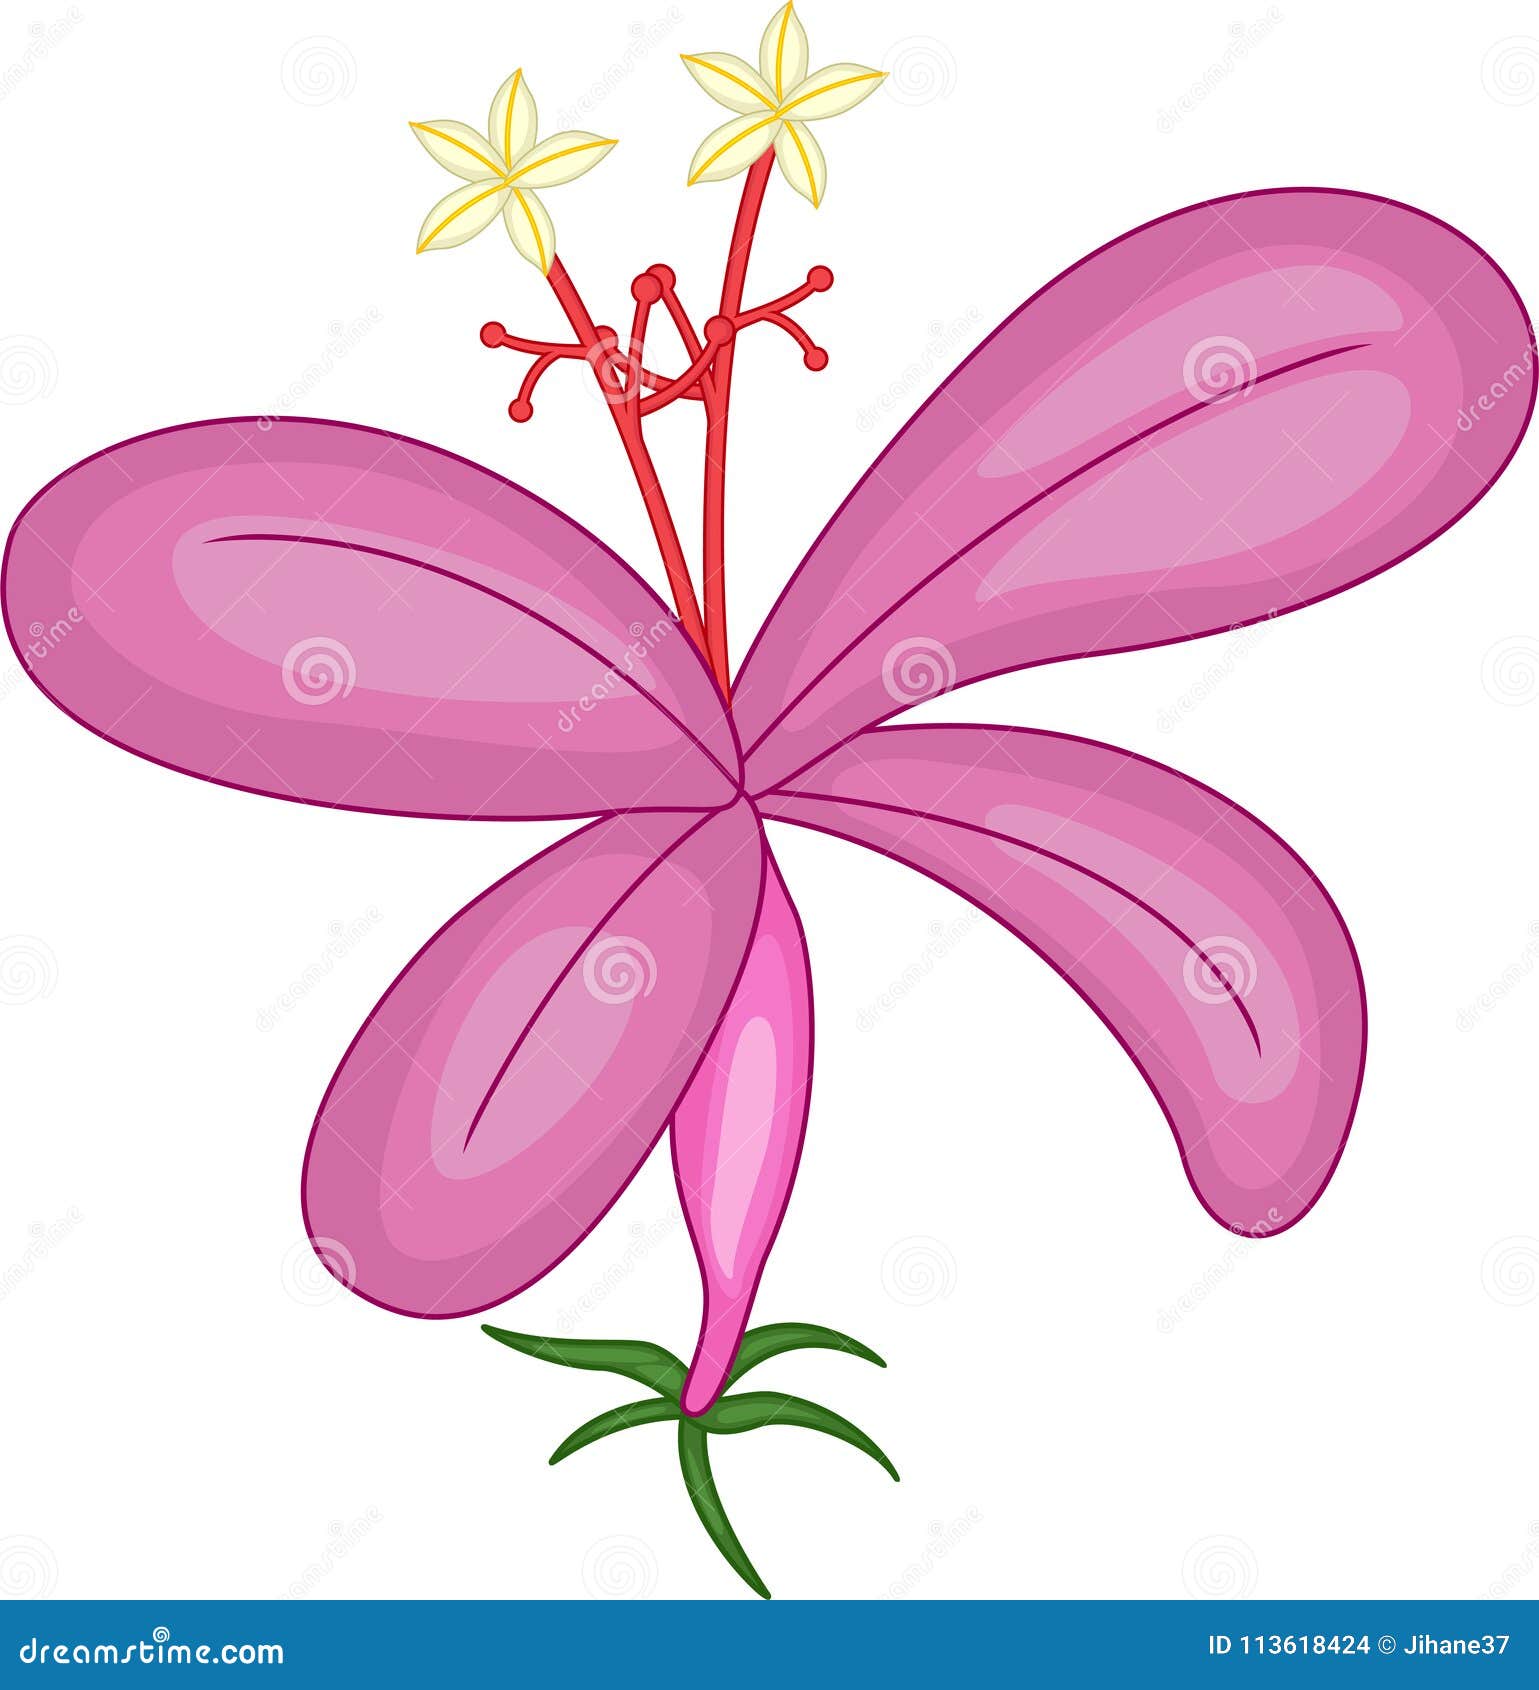 Cute Orchid Cartoon On White Background Stock Illustration